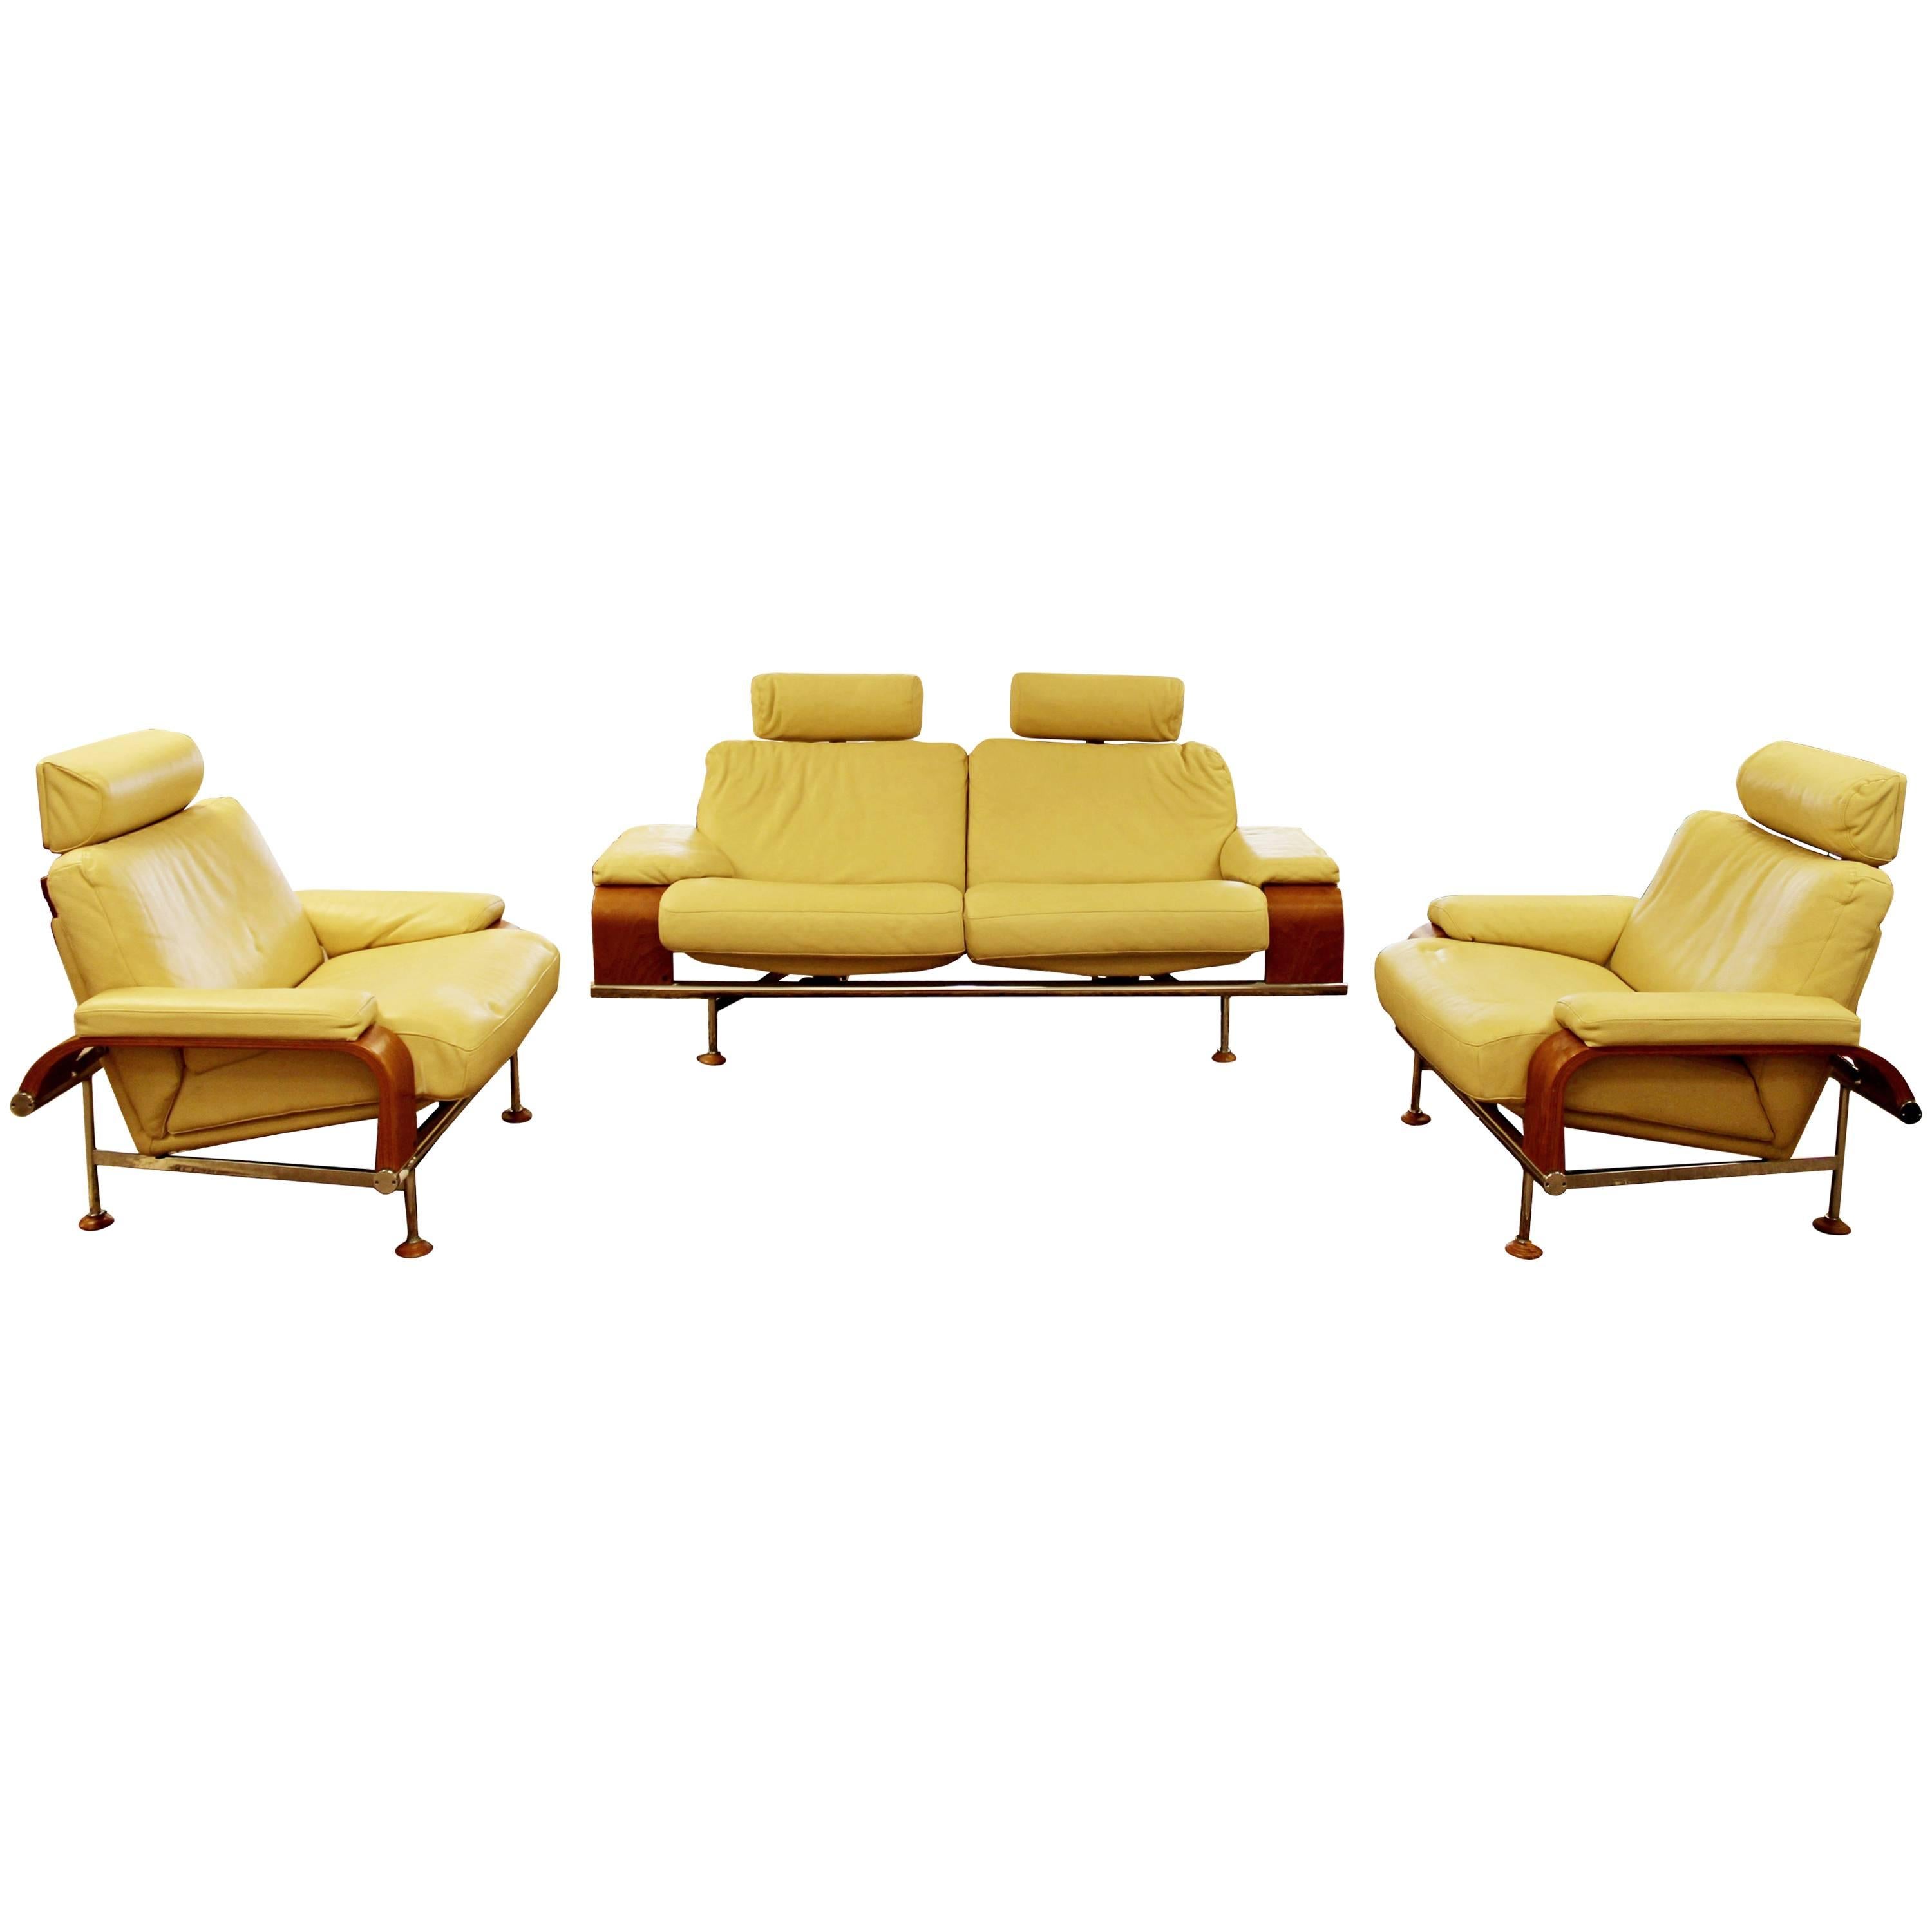 Contemporary Modern Nelo Sweden Reclining Sofa Pair of Reclining Lounge Chairs